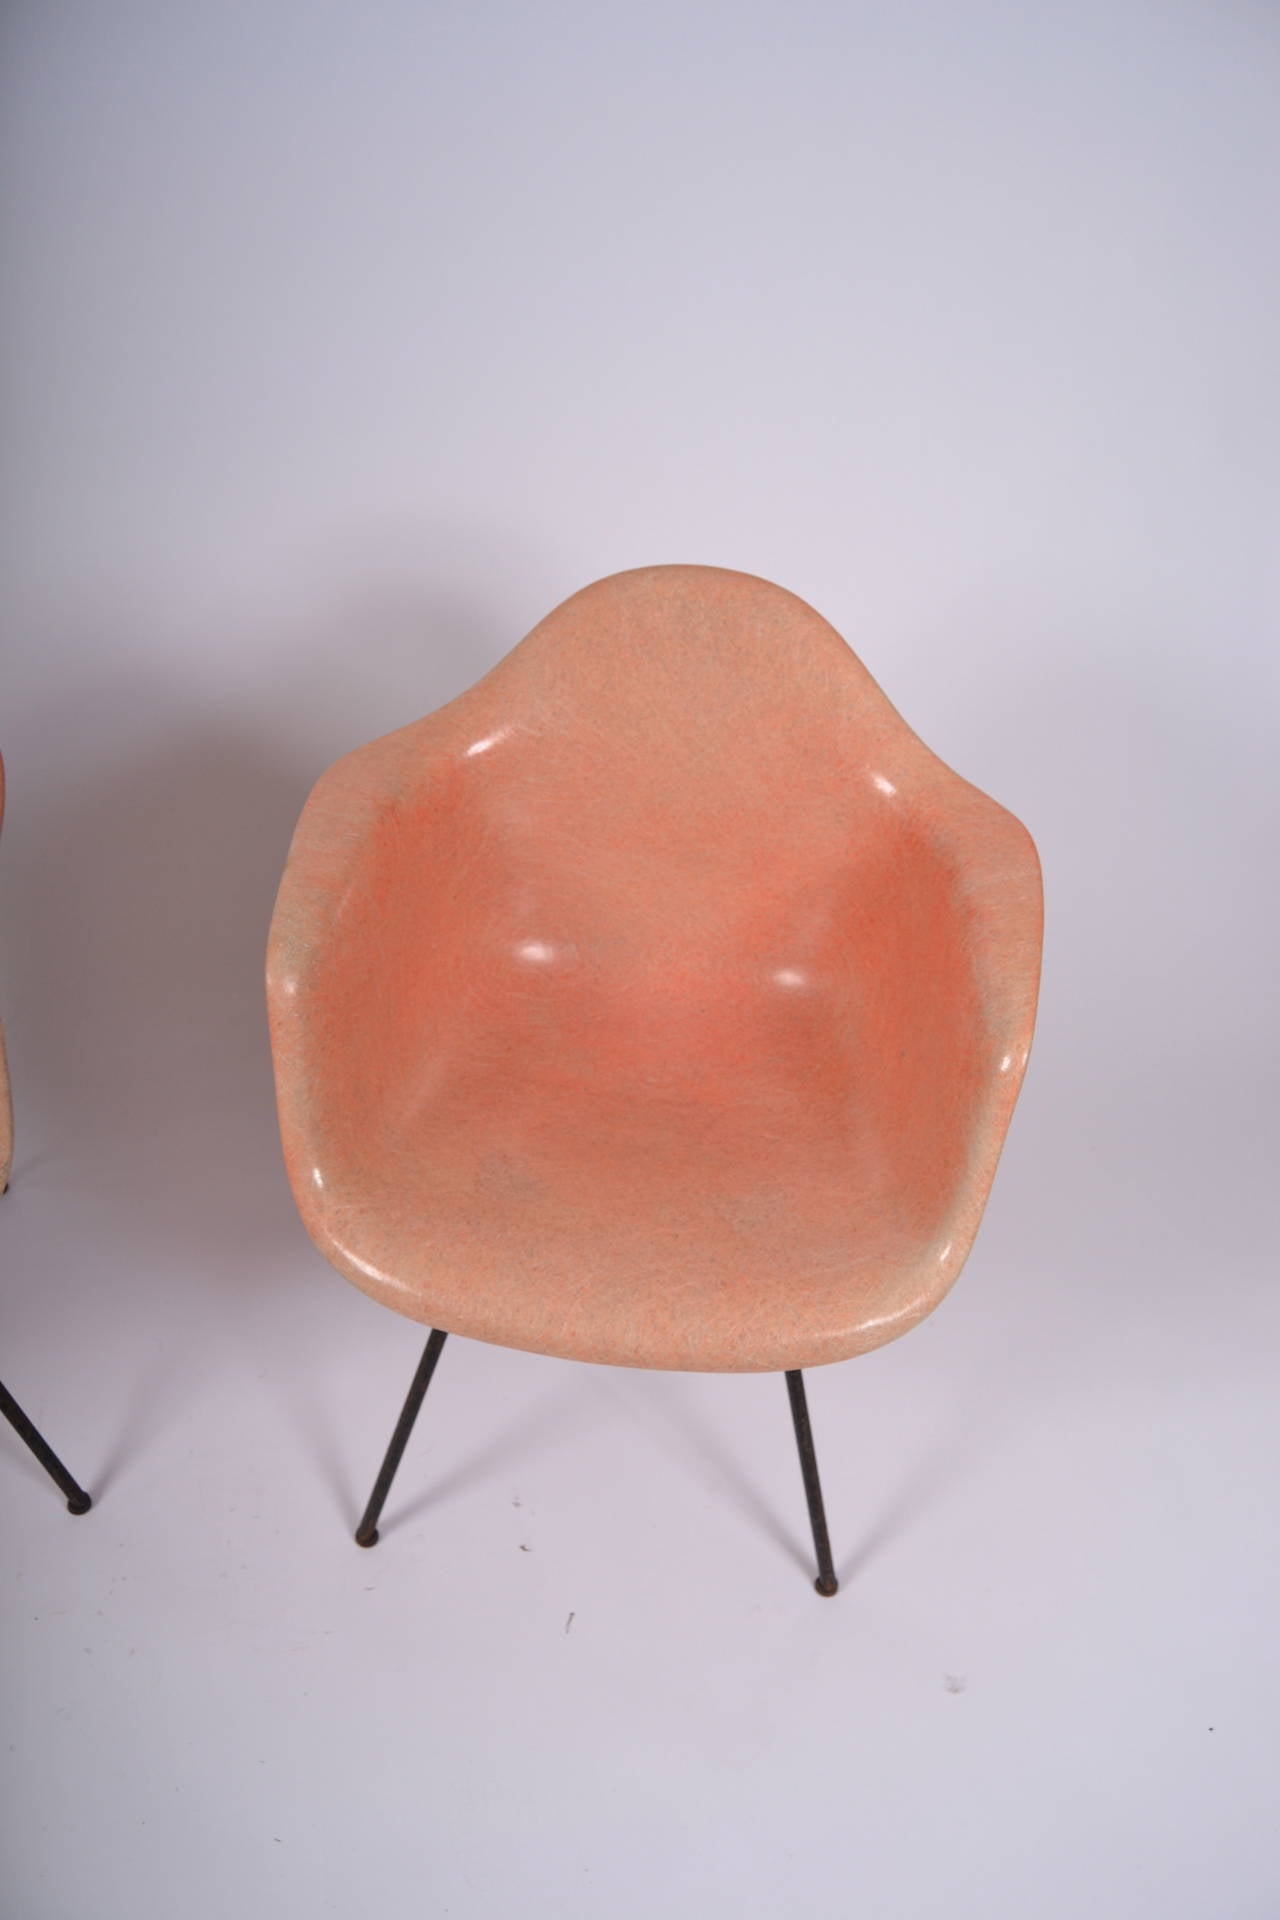 Eames Rope Edge Zenith rare DAX Salmon fiber glass armchairs.

Very fine condition for their age.

Checkerboard sticker on both chairs.